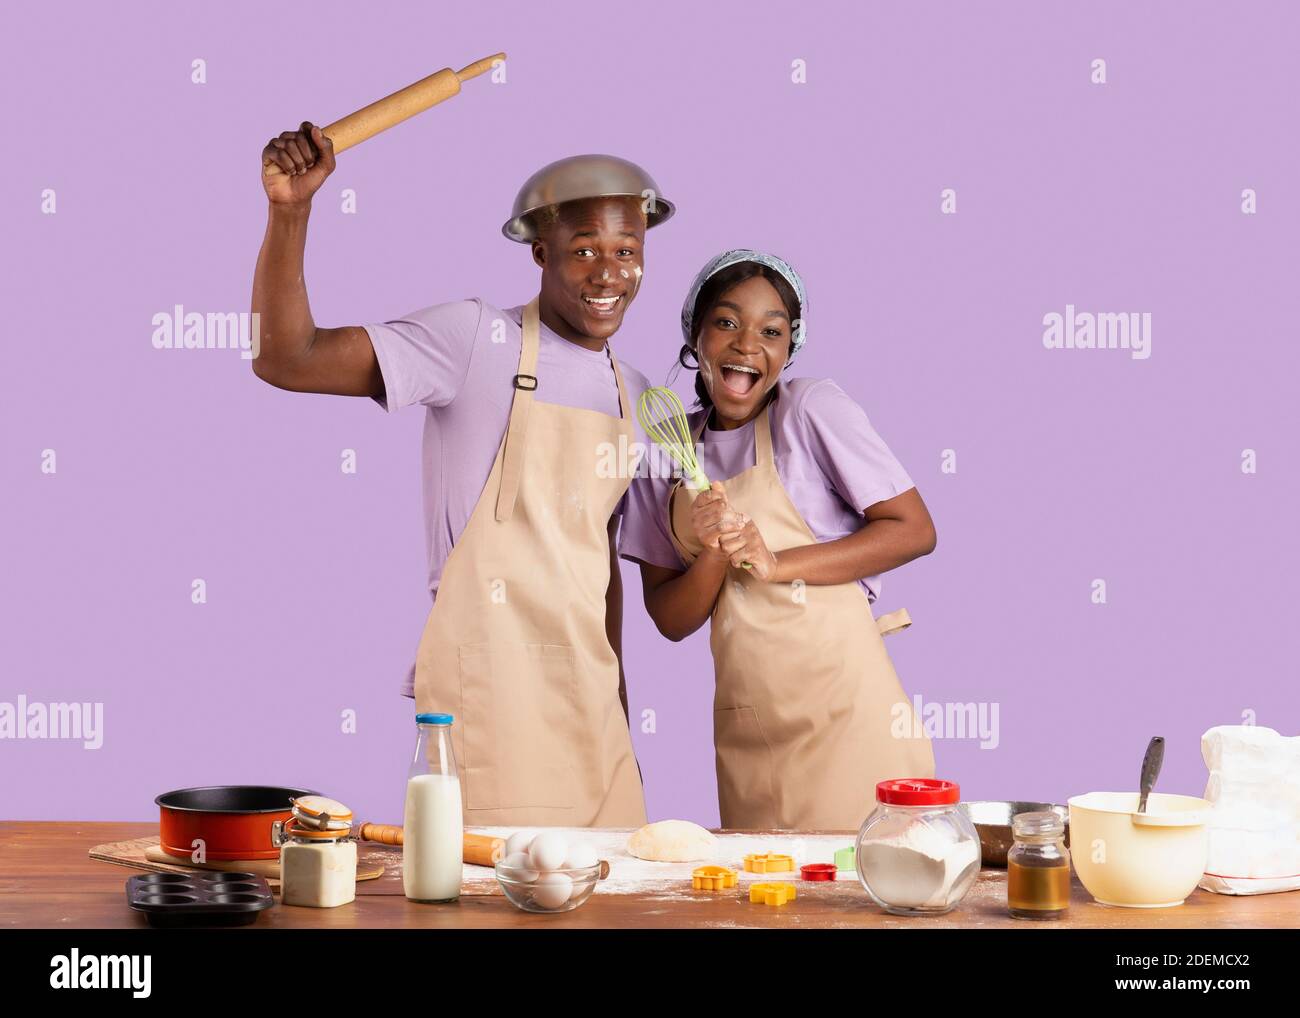 Funny black guy with girlfriend wearing aprons, holding kitchen utensils,  having fun while cooking on violet background Stock Photo - Alamy